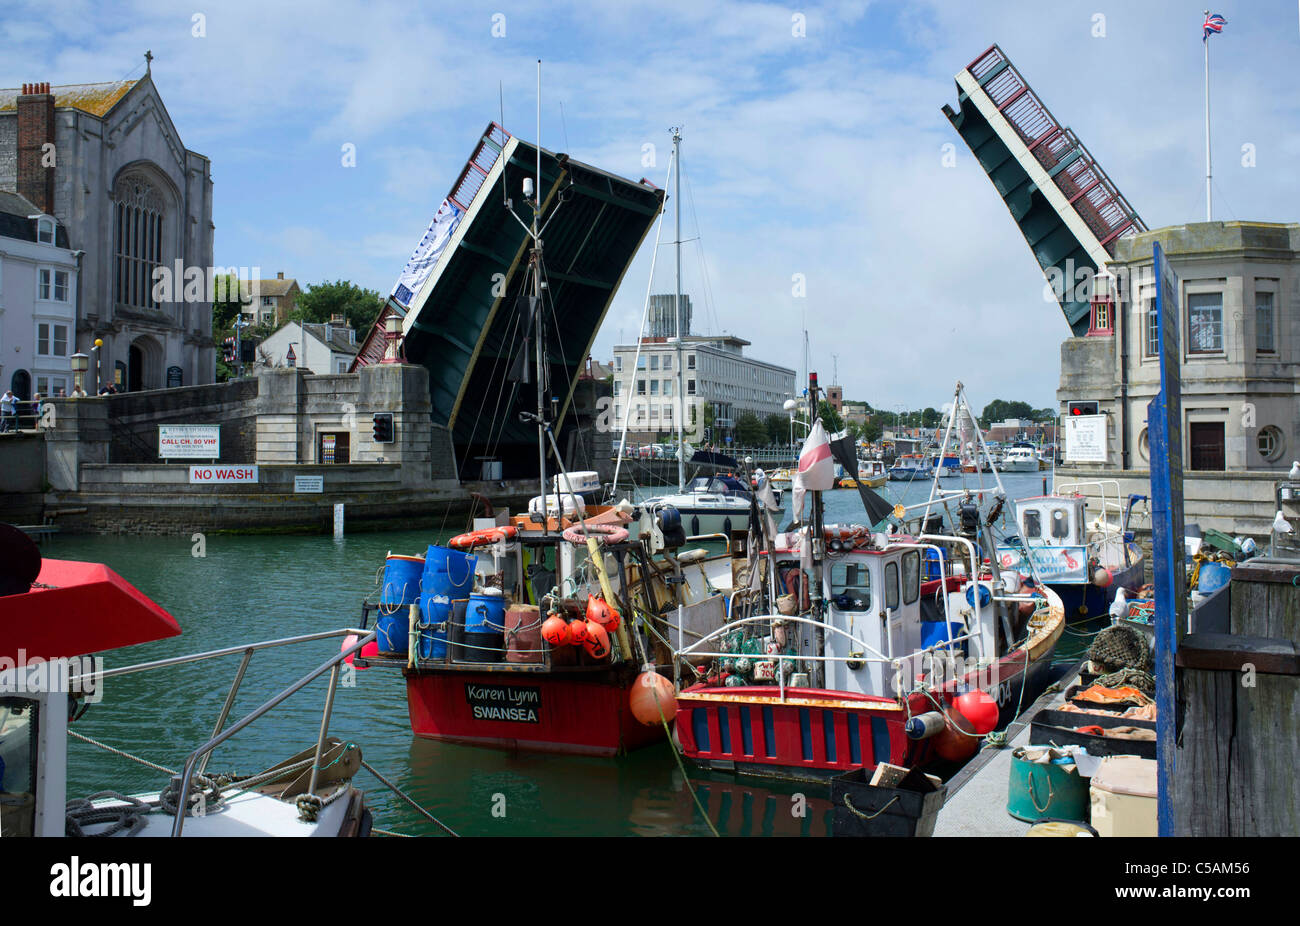 A view of fishing boats and a lifting bridge in Weymouth harbour, Dorset, UK Stock Photo